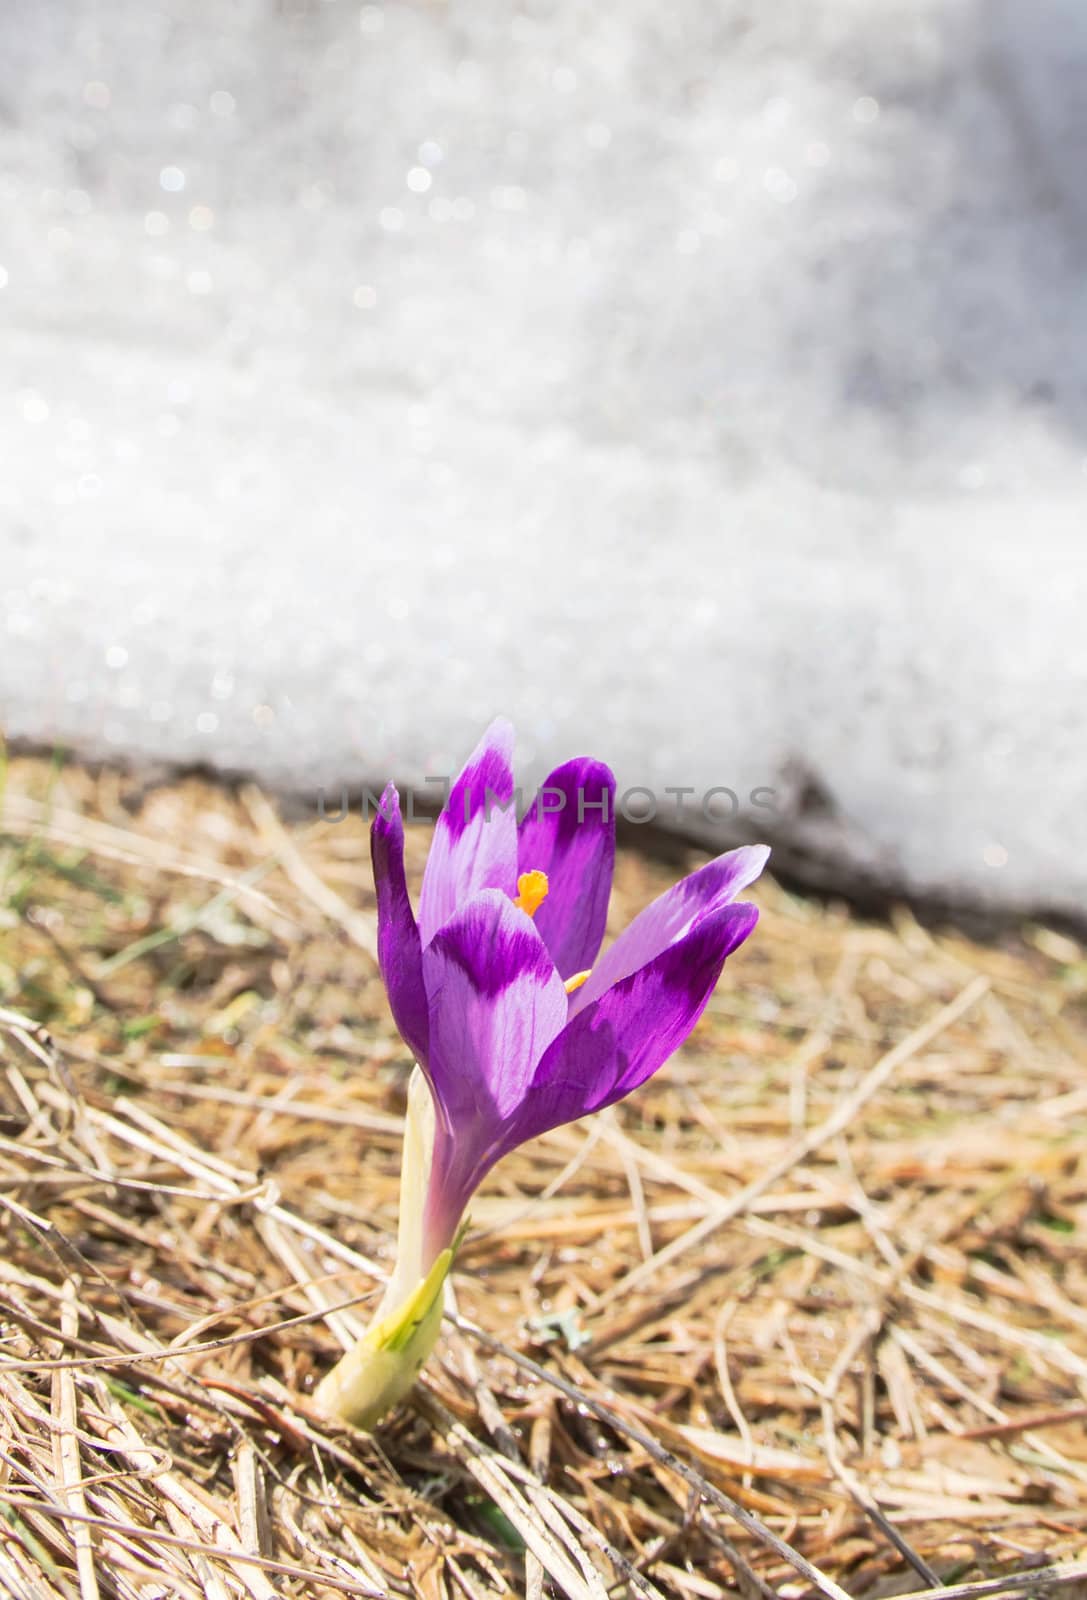 Spring in mountines - crocus and snow